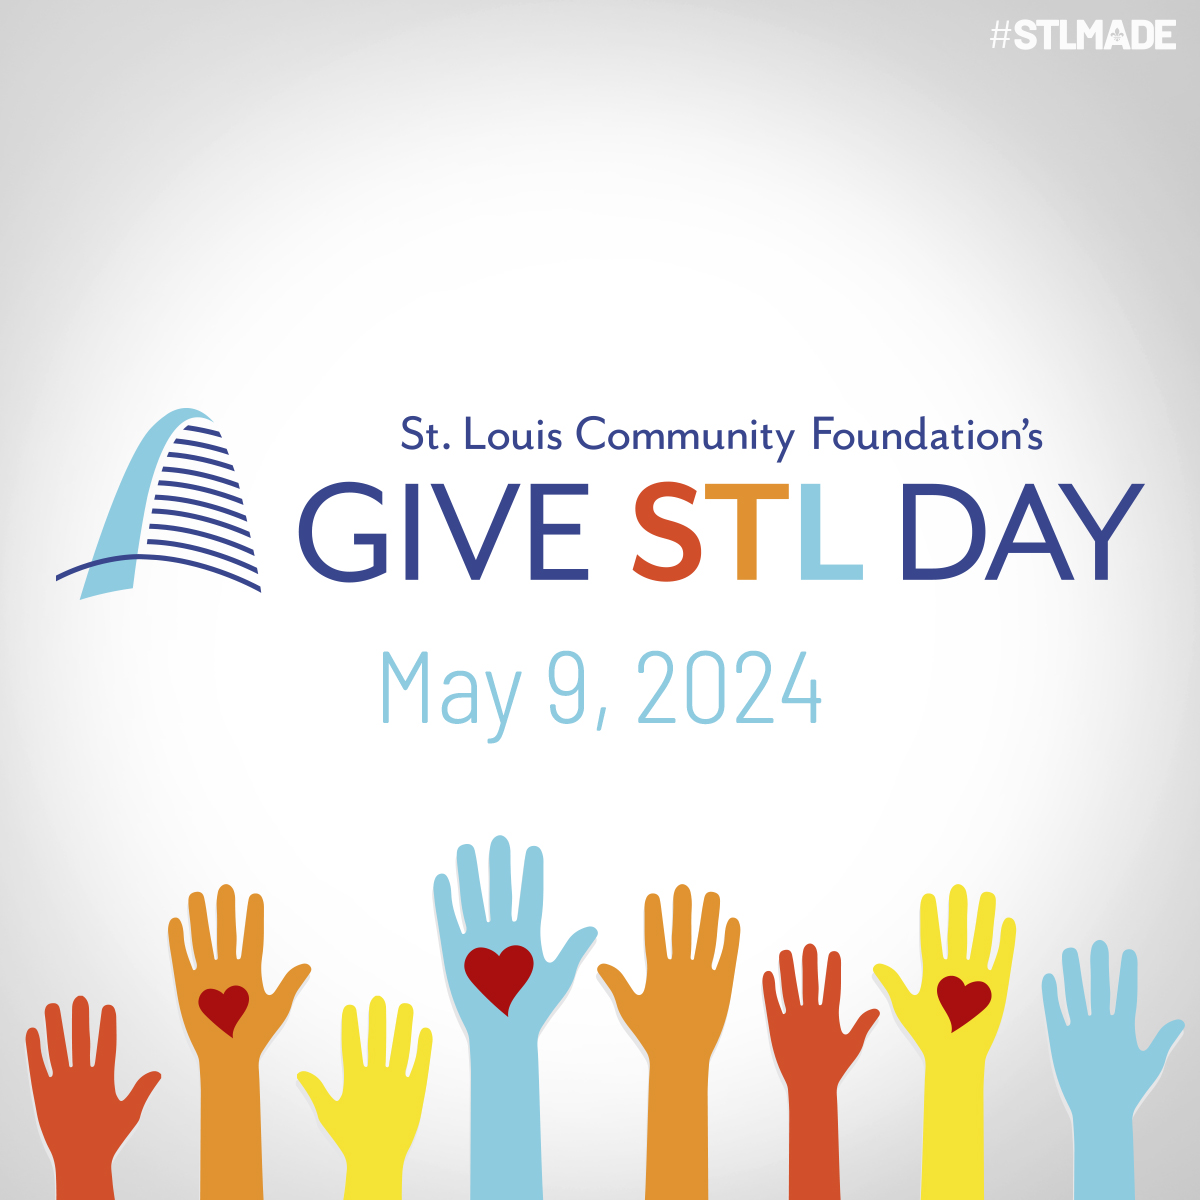 It’s St. Louis’ most generous day. Search local nonprofits and donate if you can. givestlday.org/search?orgScop… #STLMade